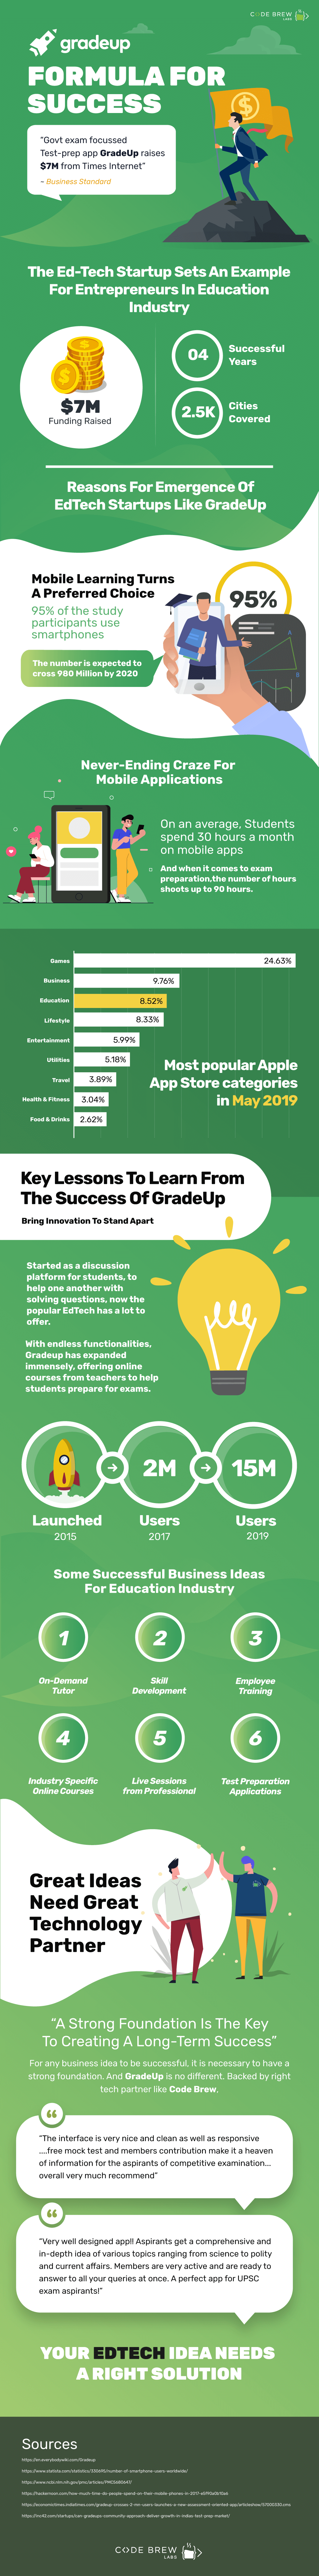 Things You Need to Learn From Gradeup's $7M Fund Raising